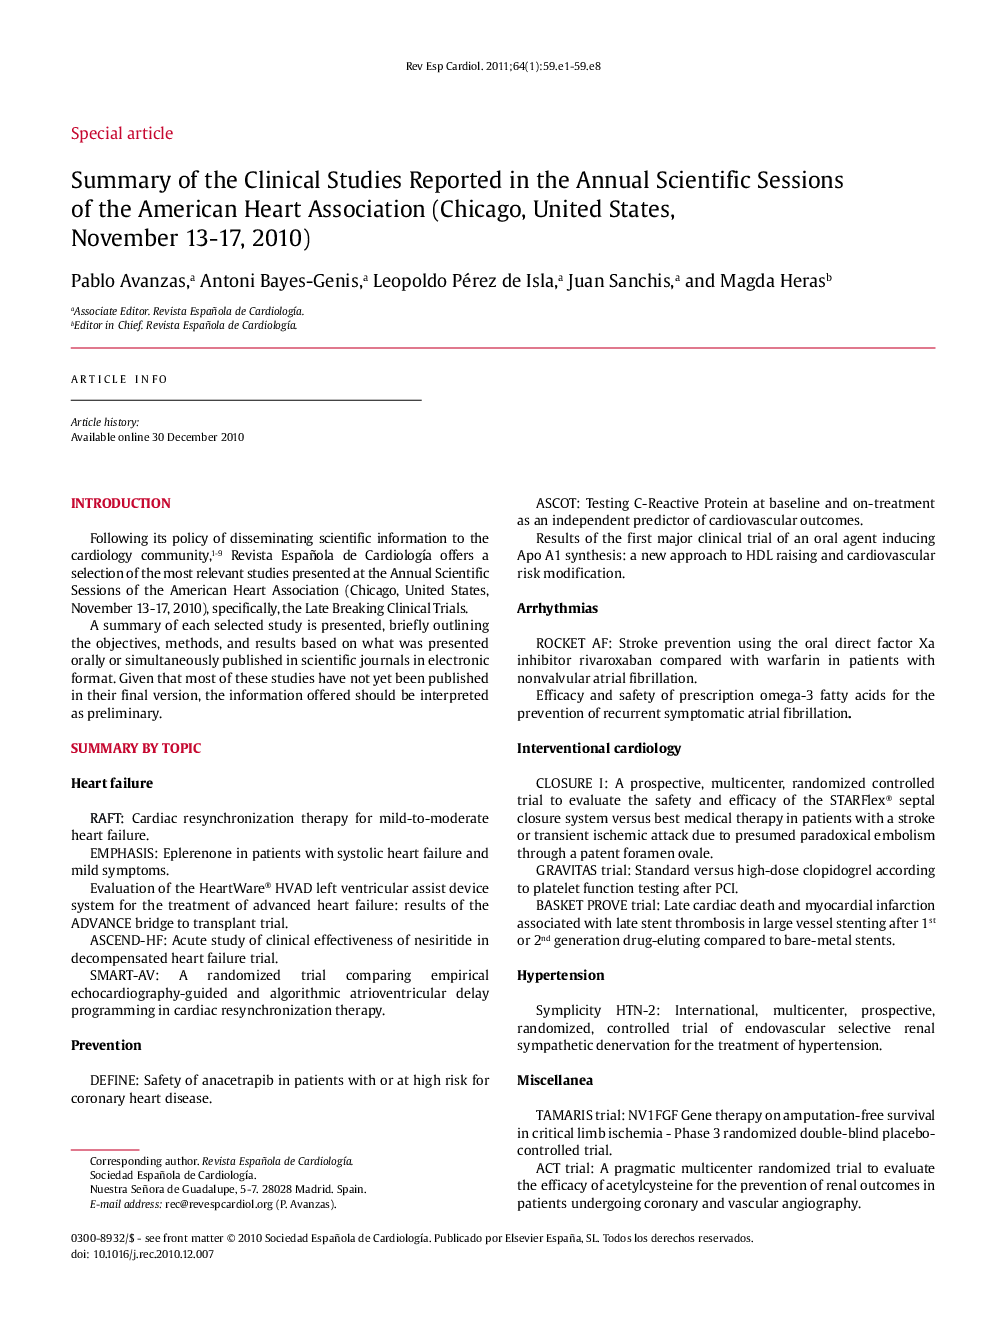 Summary of the Clinical Studies Reported in the Annual Scientific Sessions of the American Heart Association (Chicago, United States, November 13-17, 2010)